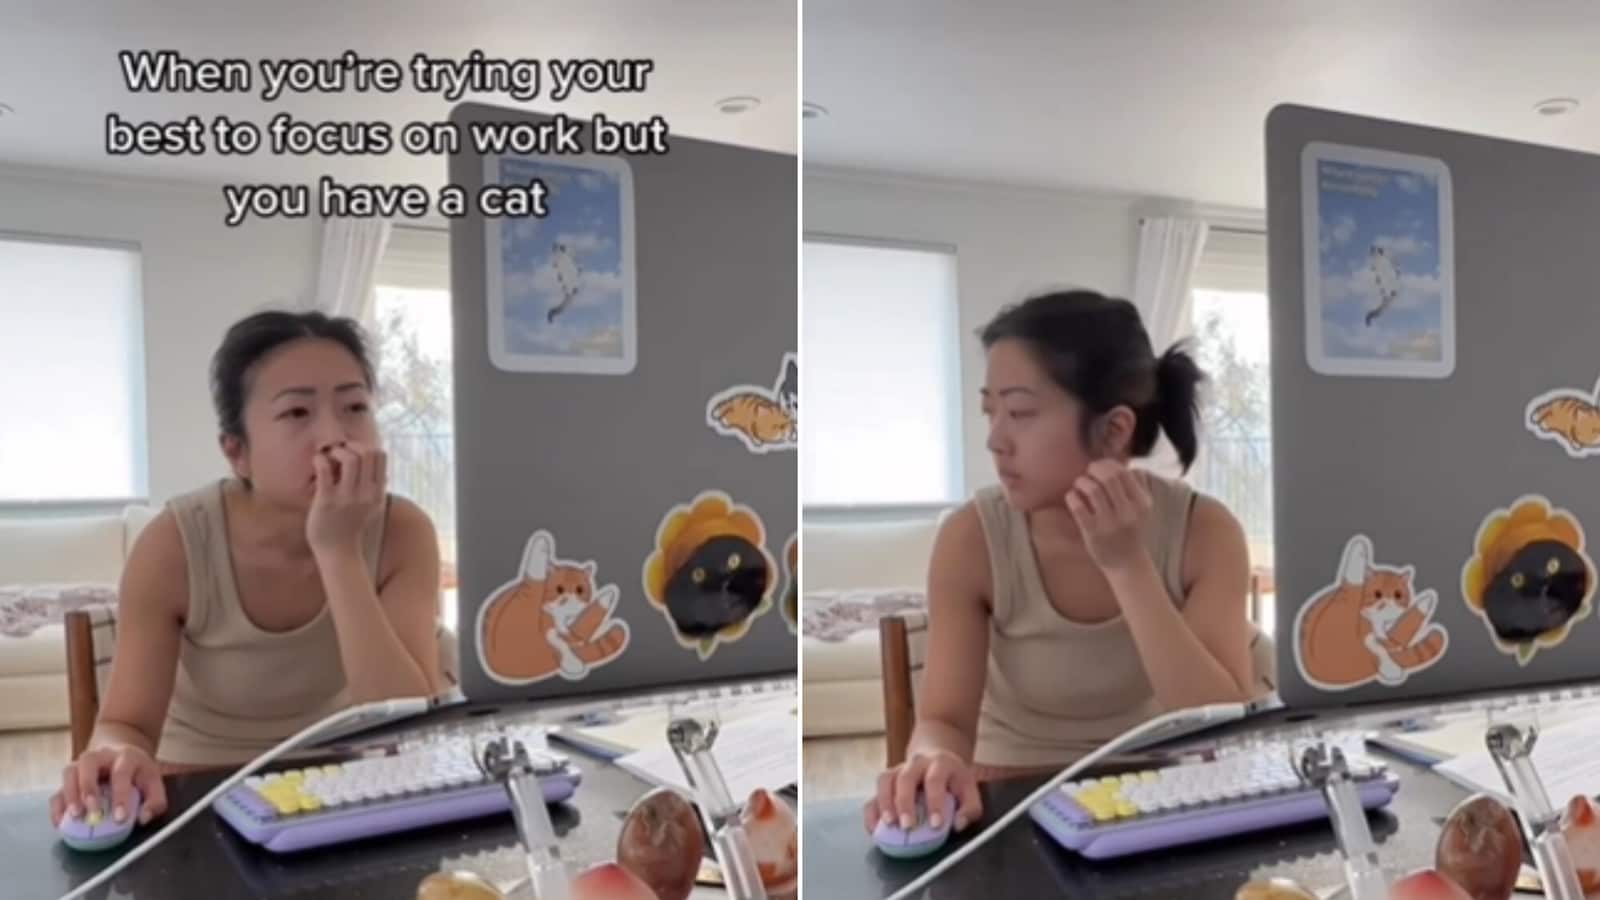 Cat uses adorable way to distract woman trying to work